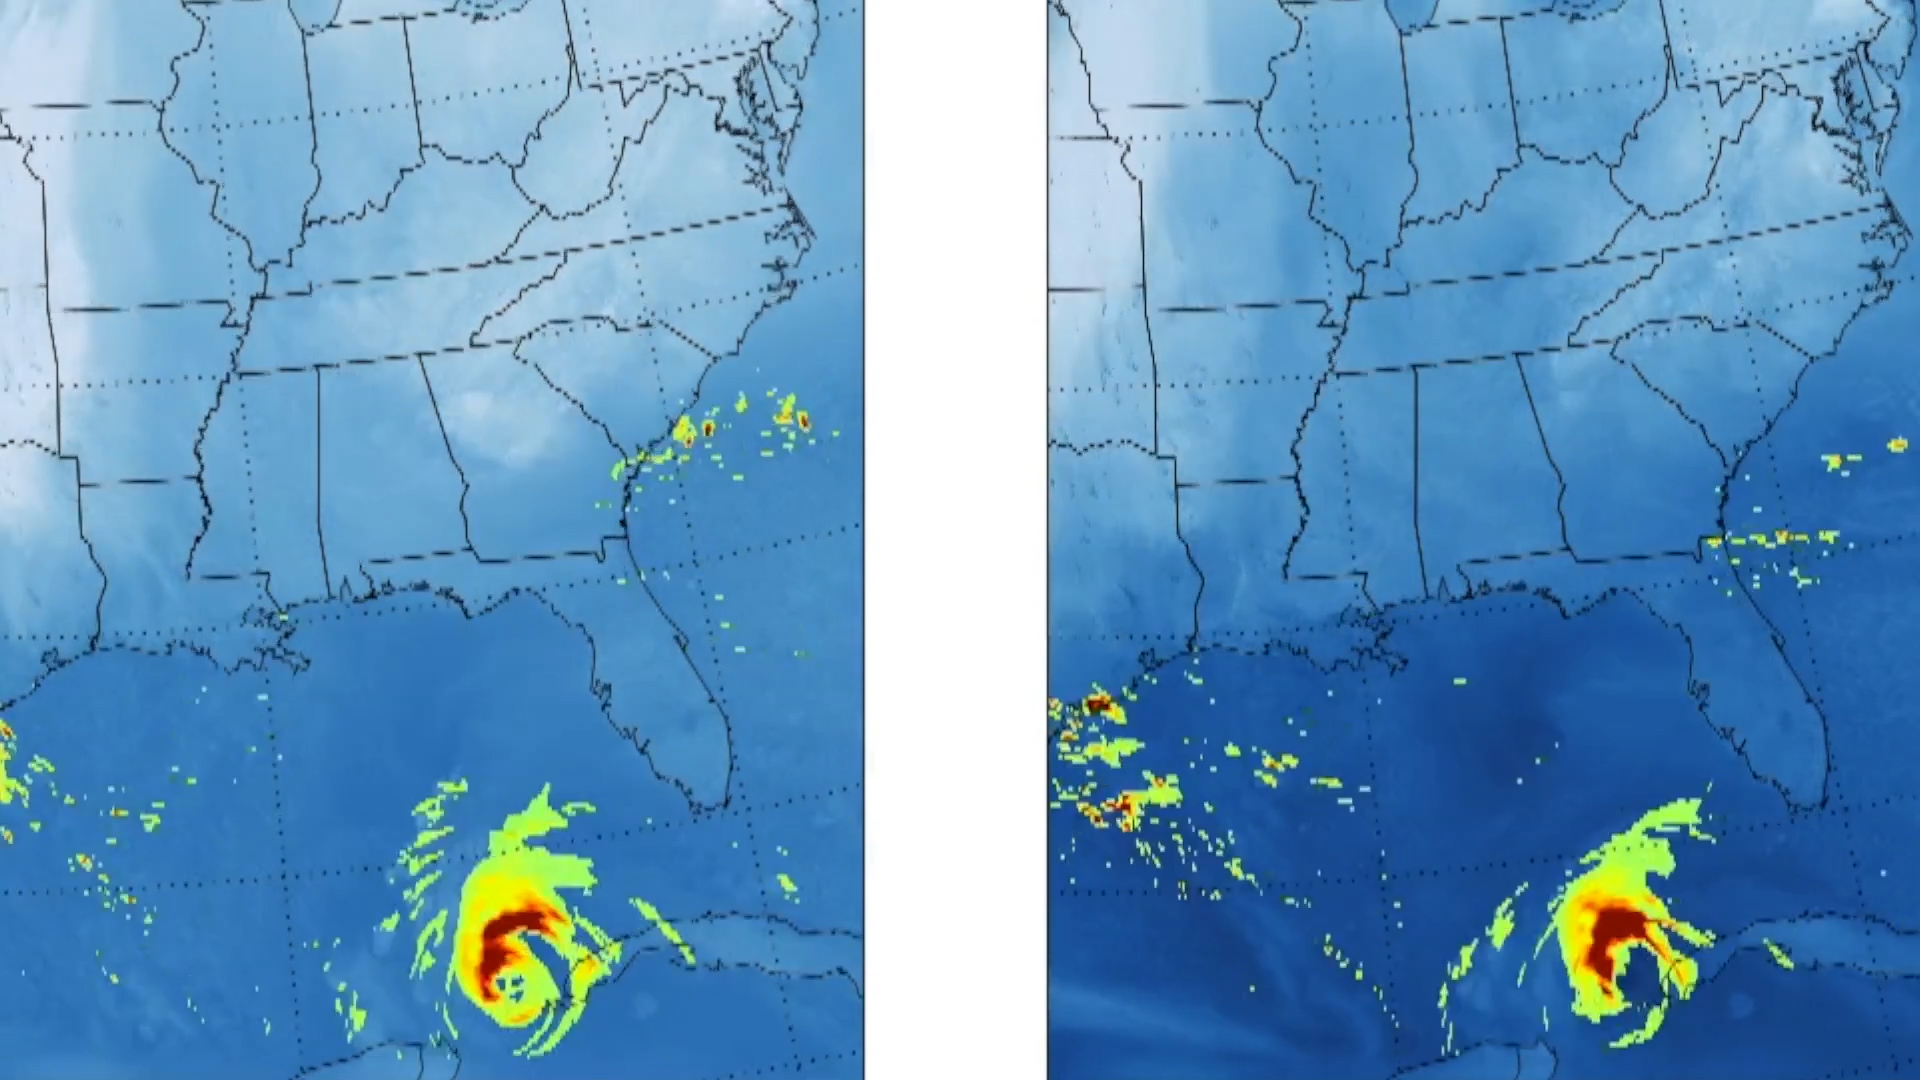 Scientists predicting more severe hurricanes at the end of this century